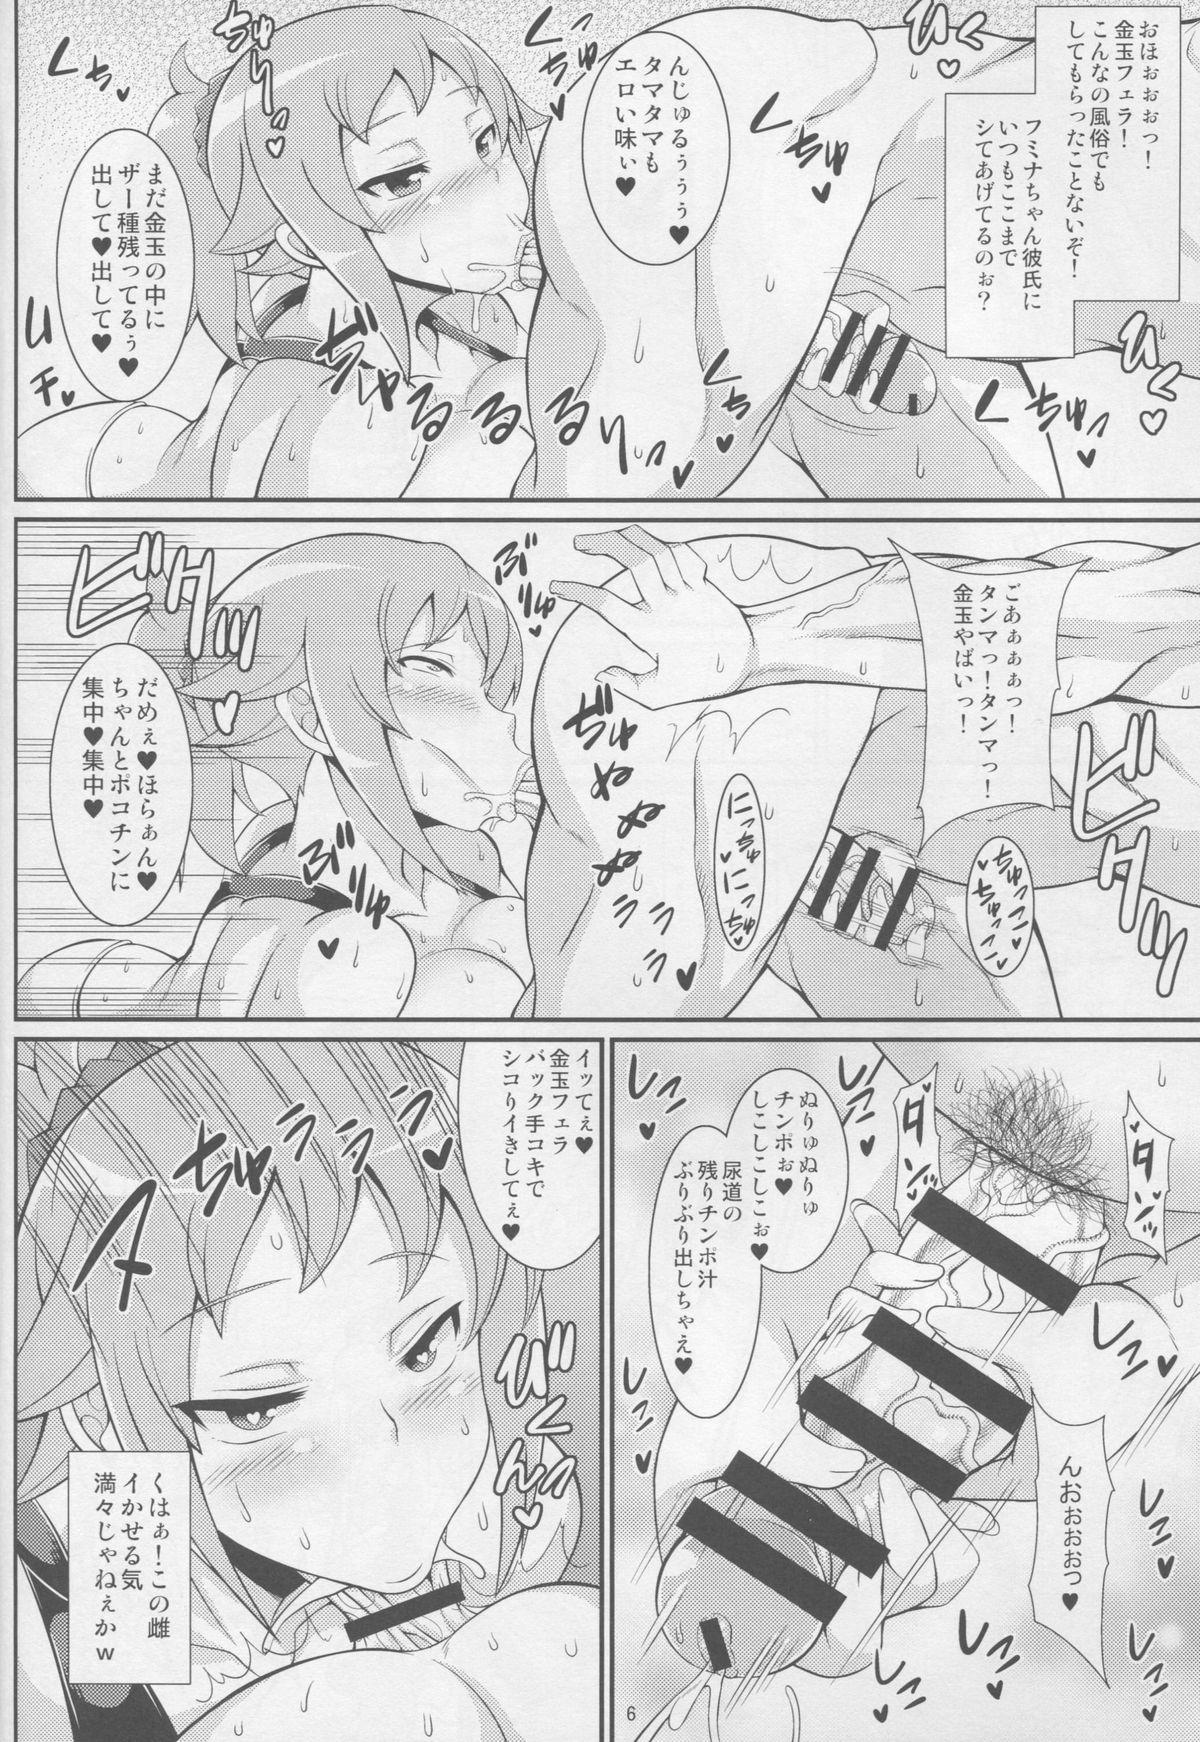 Action Senpai no Ero Ana - Gundam build fighters try Mmf - Page 5